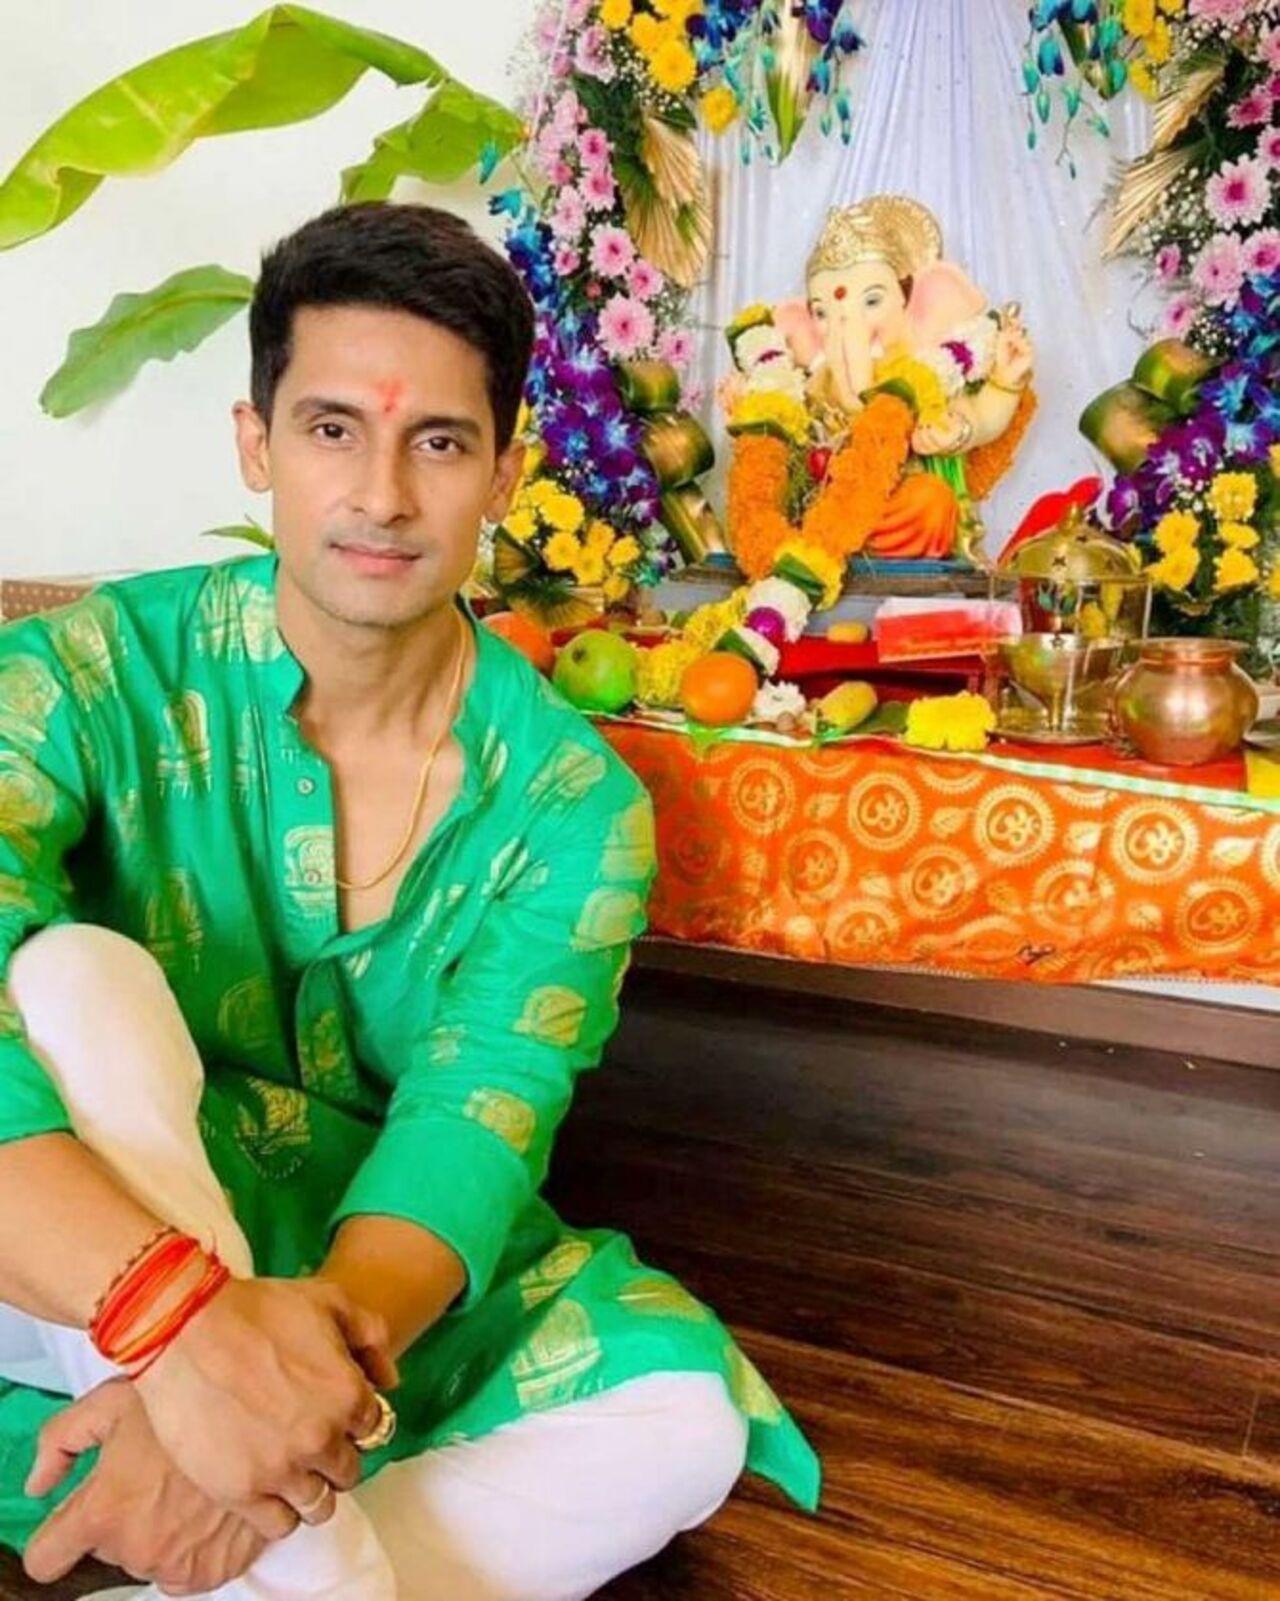 Ravi Dubey and Sargun Mehta welcome Ganpati home every year. They invite their friends to seek the blessings of Bappa